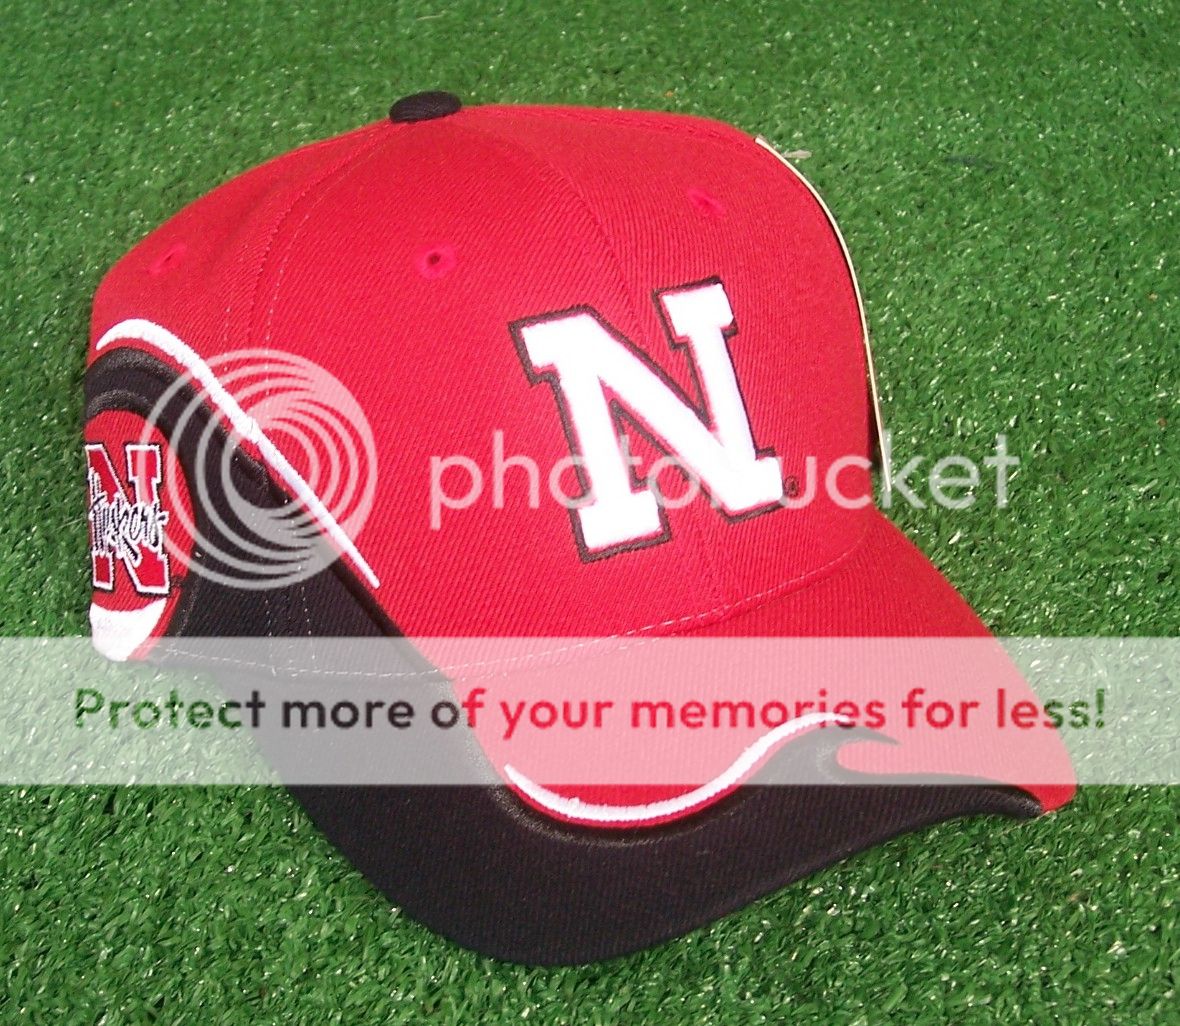 This auction is for a licensed Nebraska Cornhuskers hat/cap.